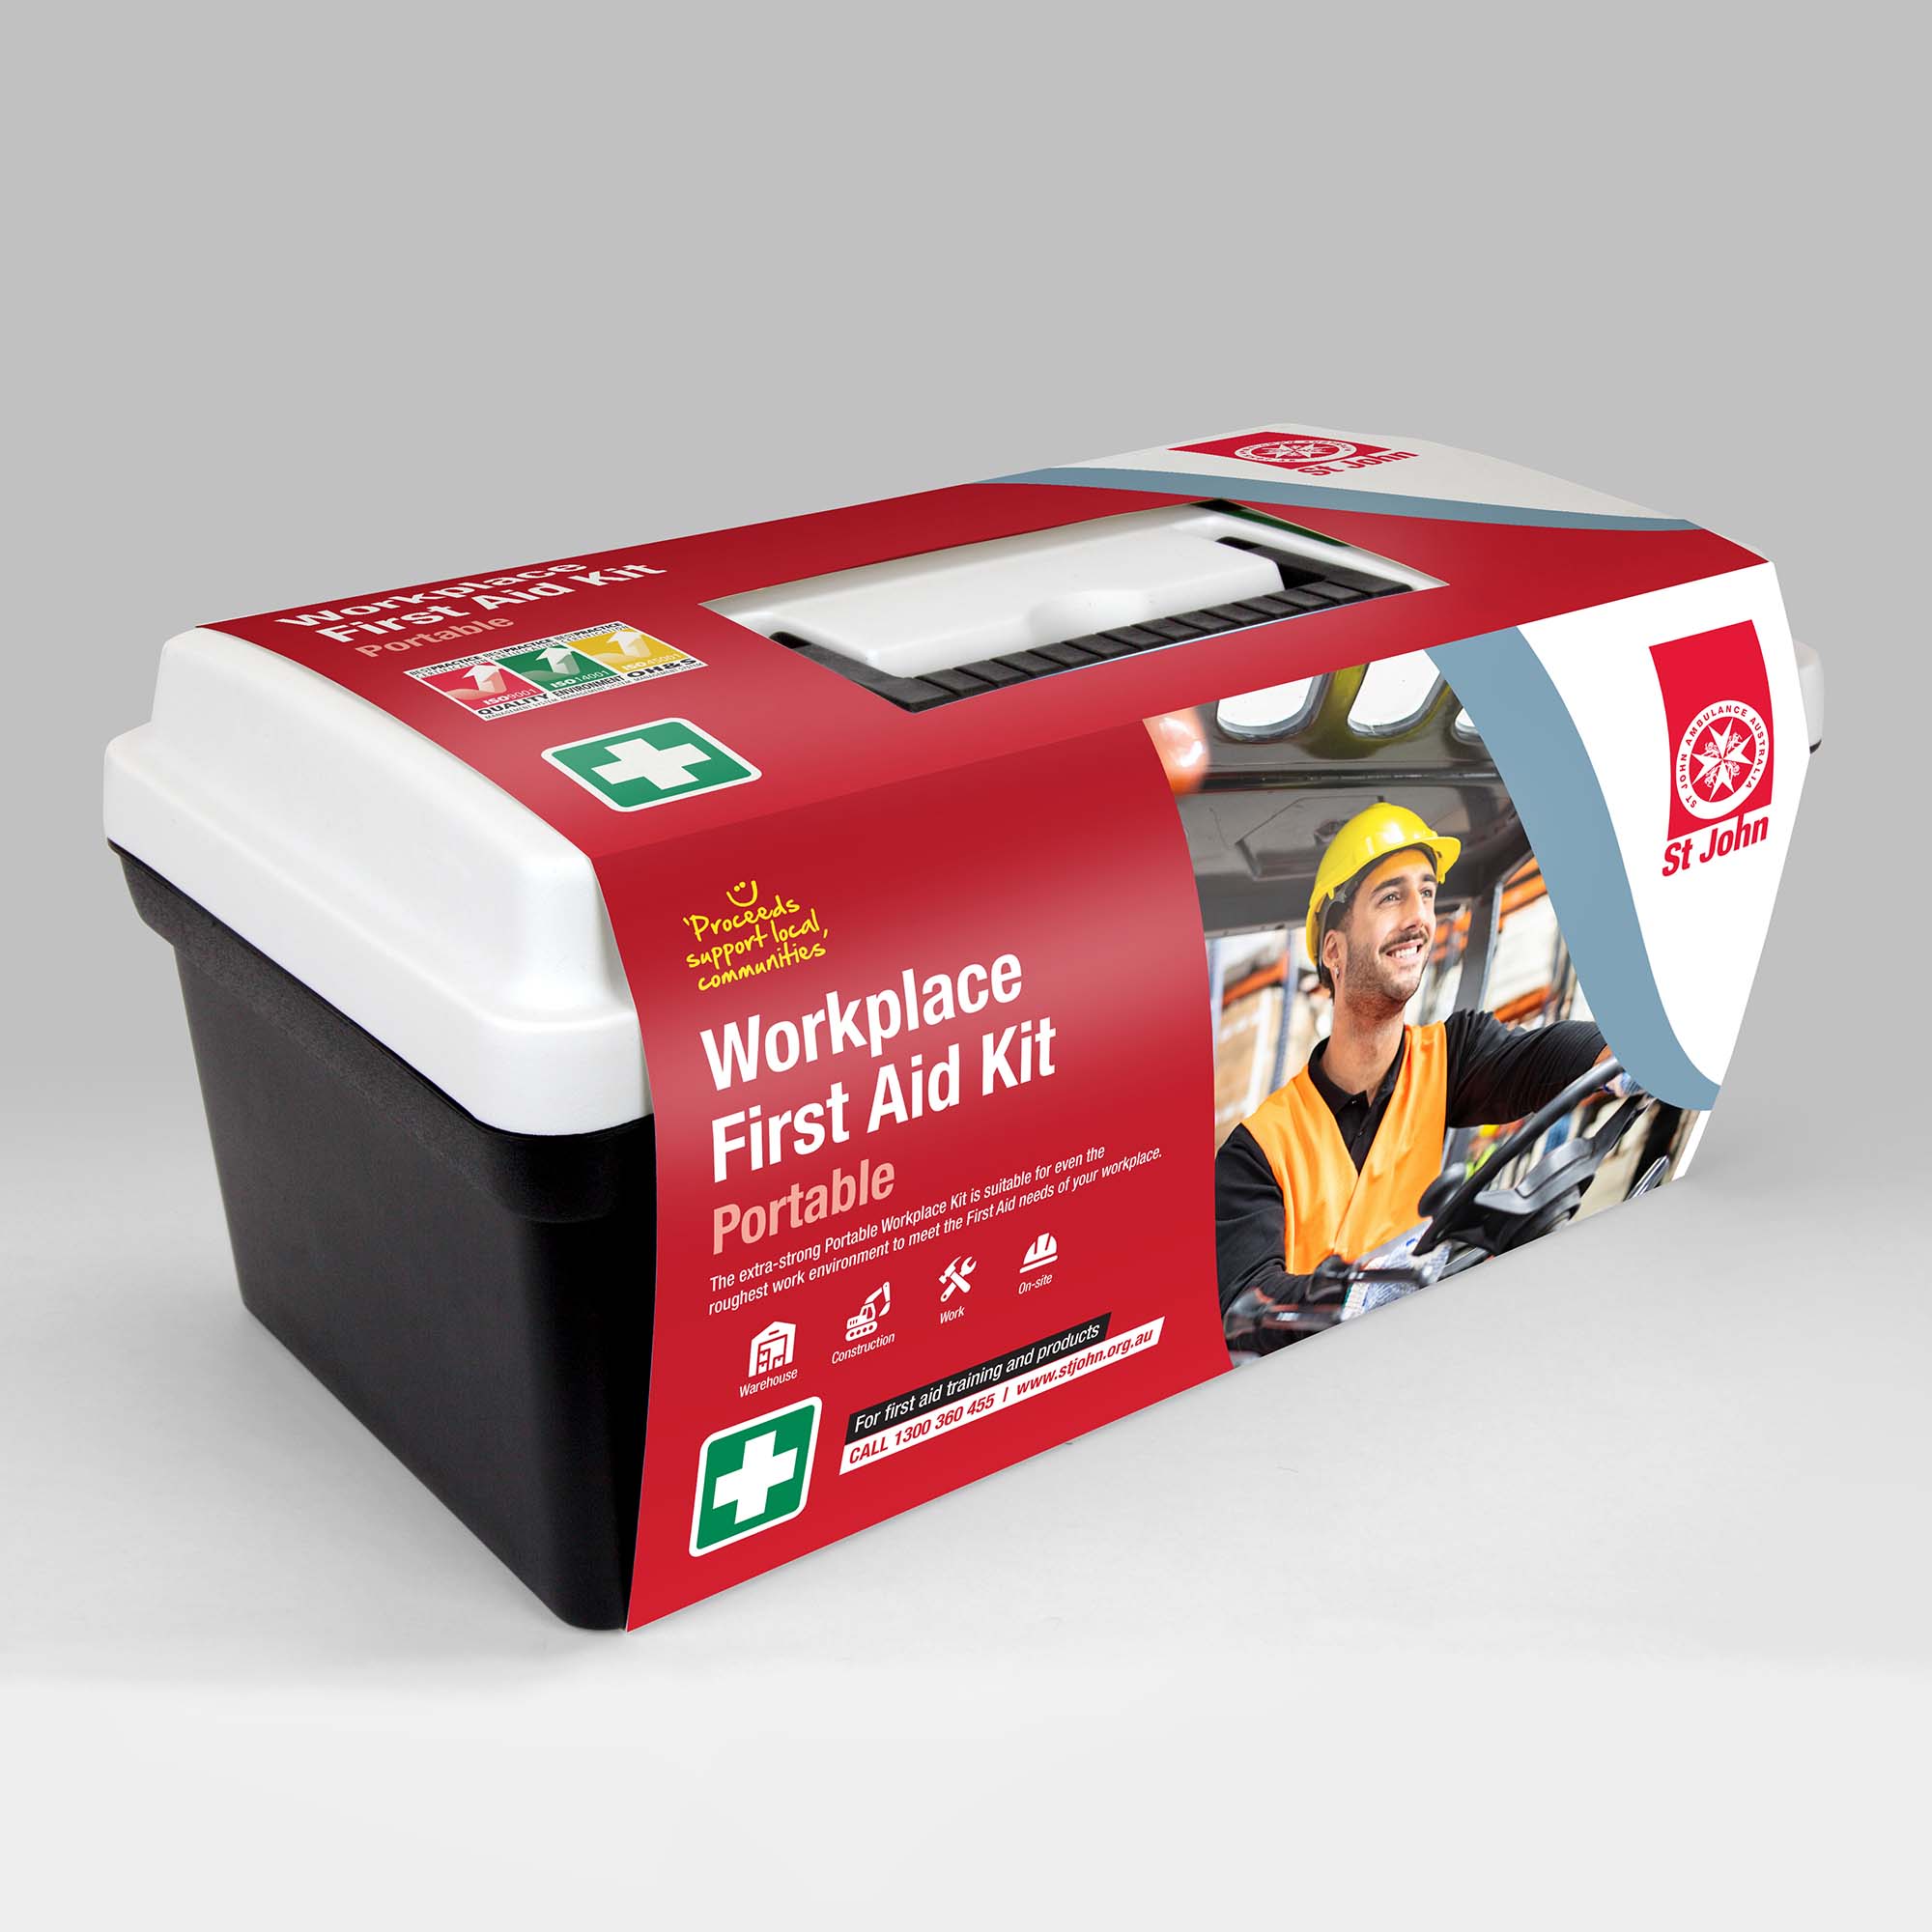 Workplace National First Aid Kit Portable